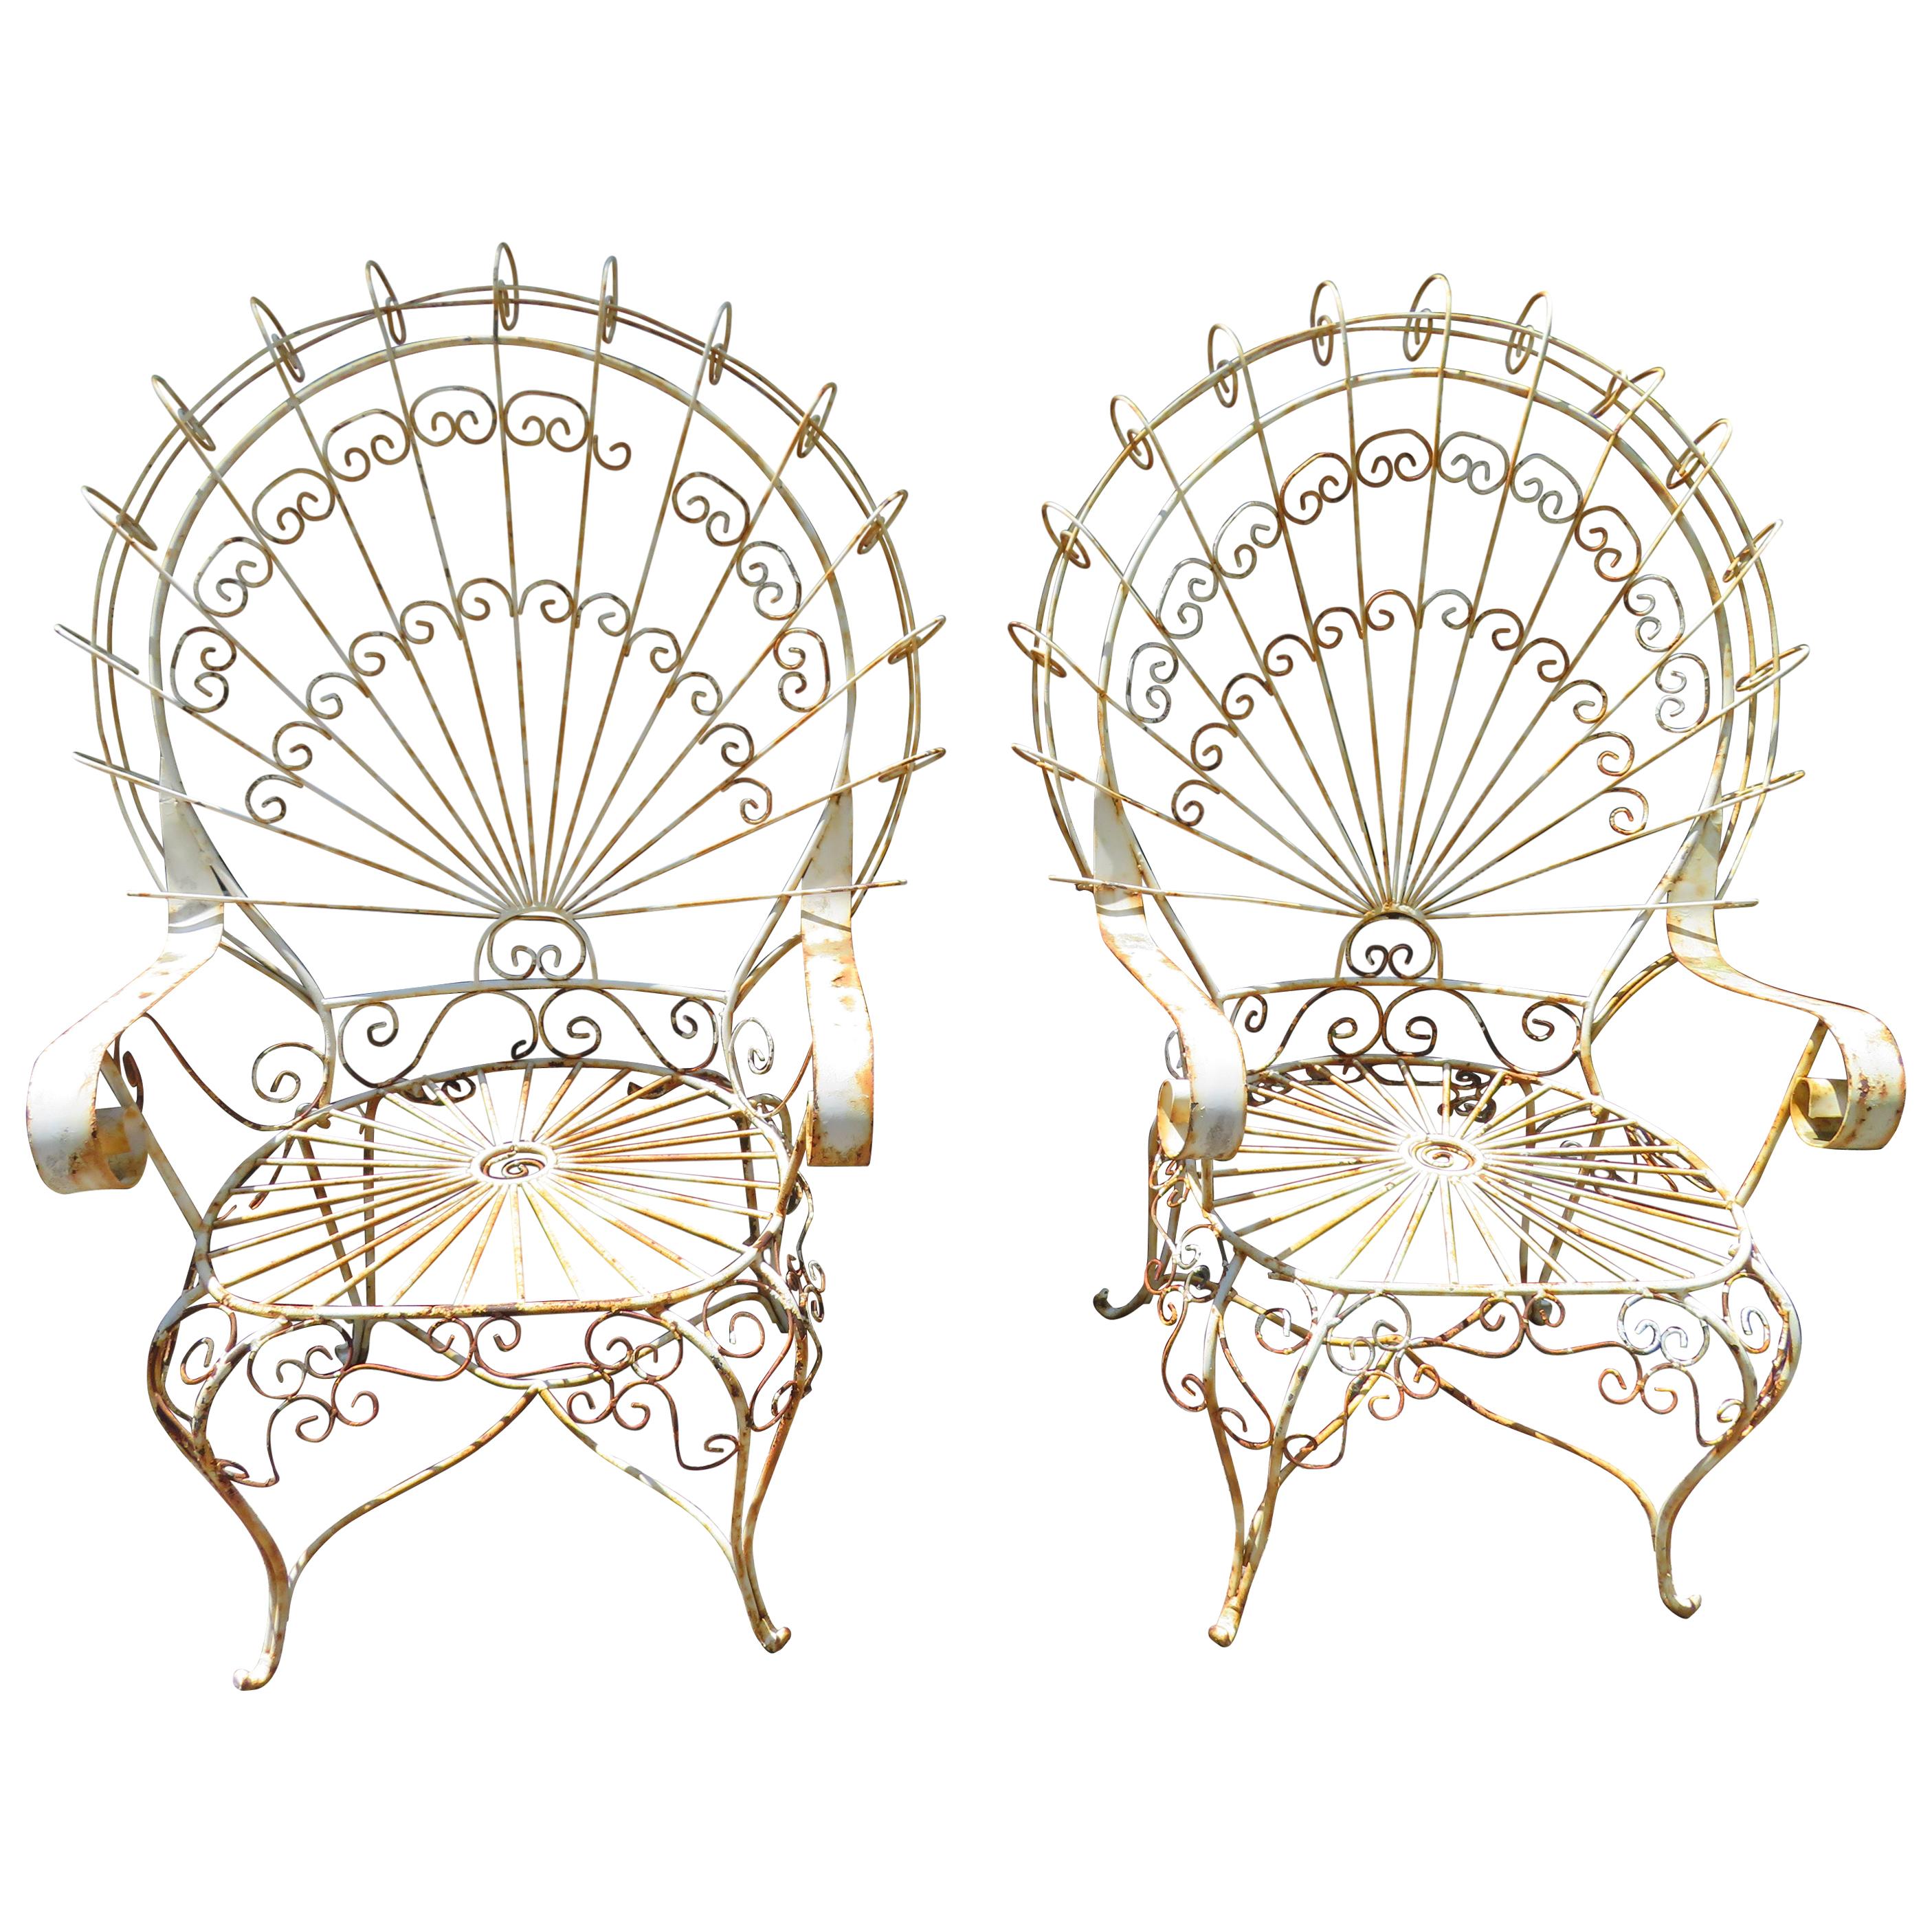 Vintage Salterini Peacock Chairs For Sale At 1stdibs